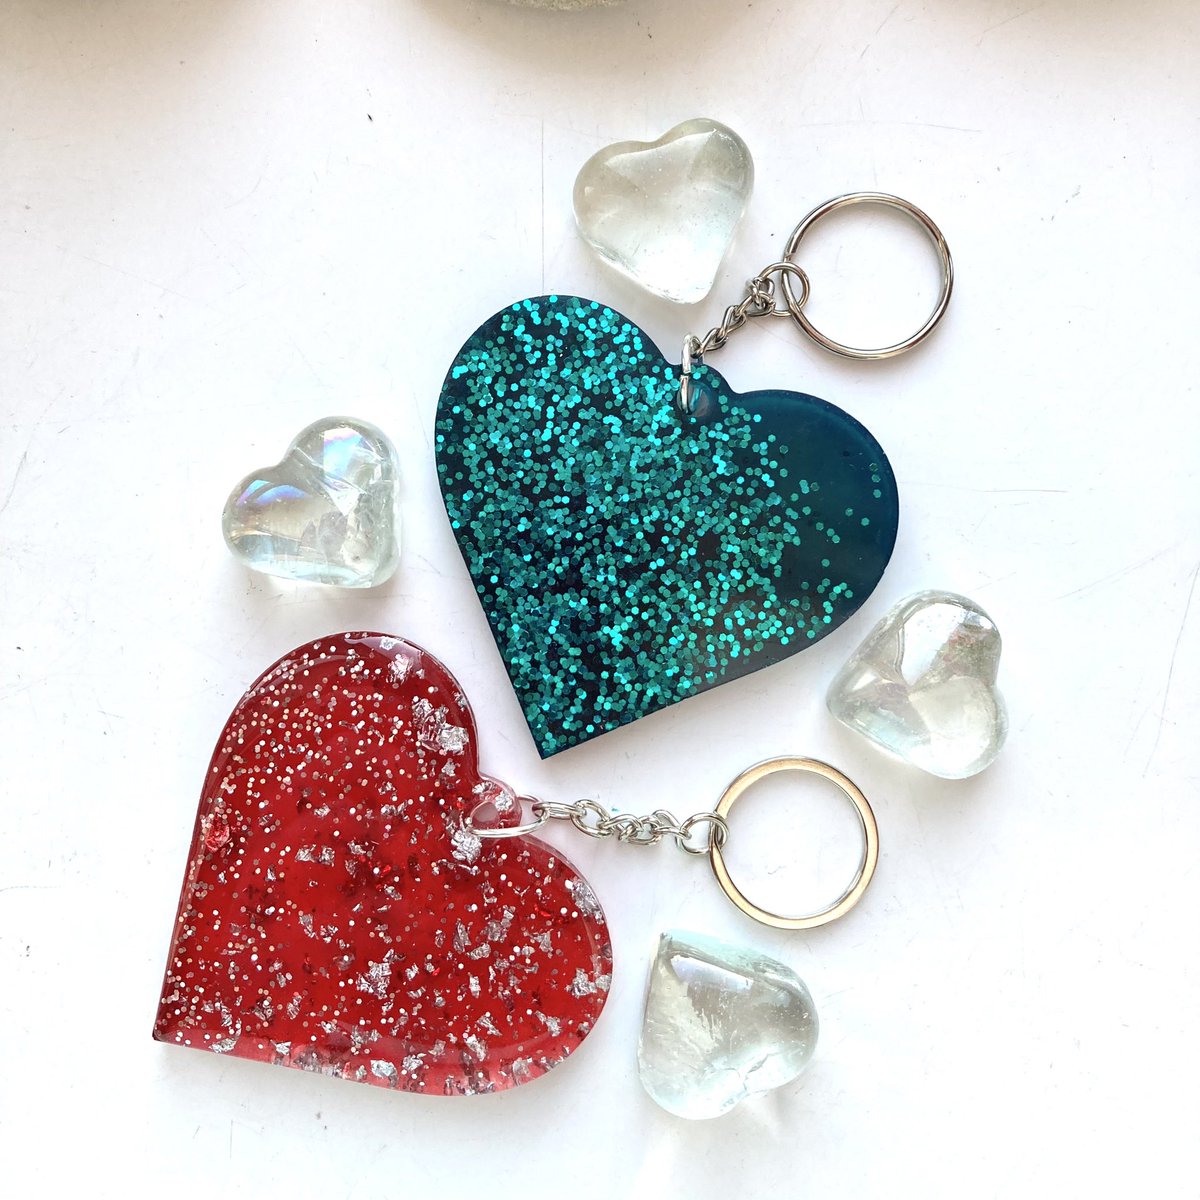 Morning, introducing two NEW resin heart keyring’s in a transparent red with silver foil and a shimmery emerald green. Great little gifts to give to your loved ones or friends: etsy.me/3p1458Z #UKGiftHour #UKGiftAM #shopindie #mhhsbd #CraftBizParty #Giftideas #etsygifts